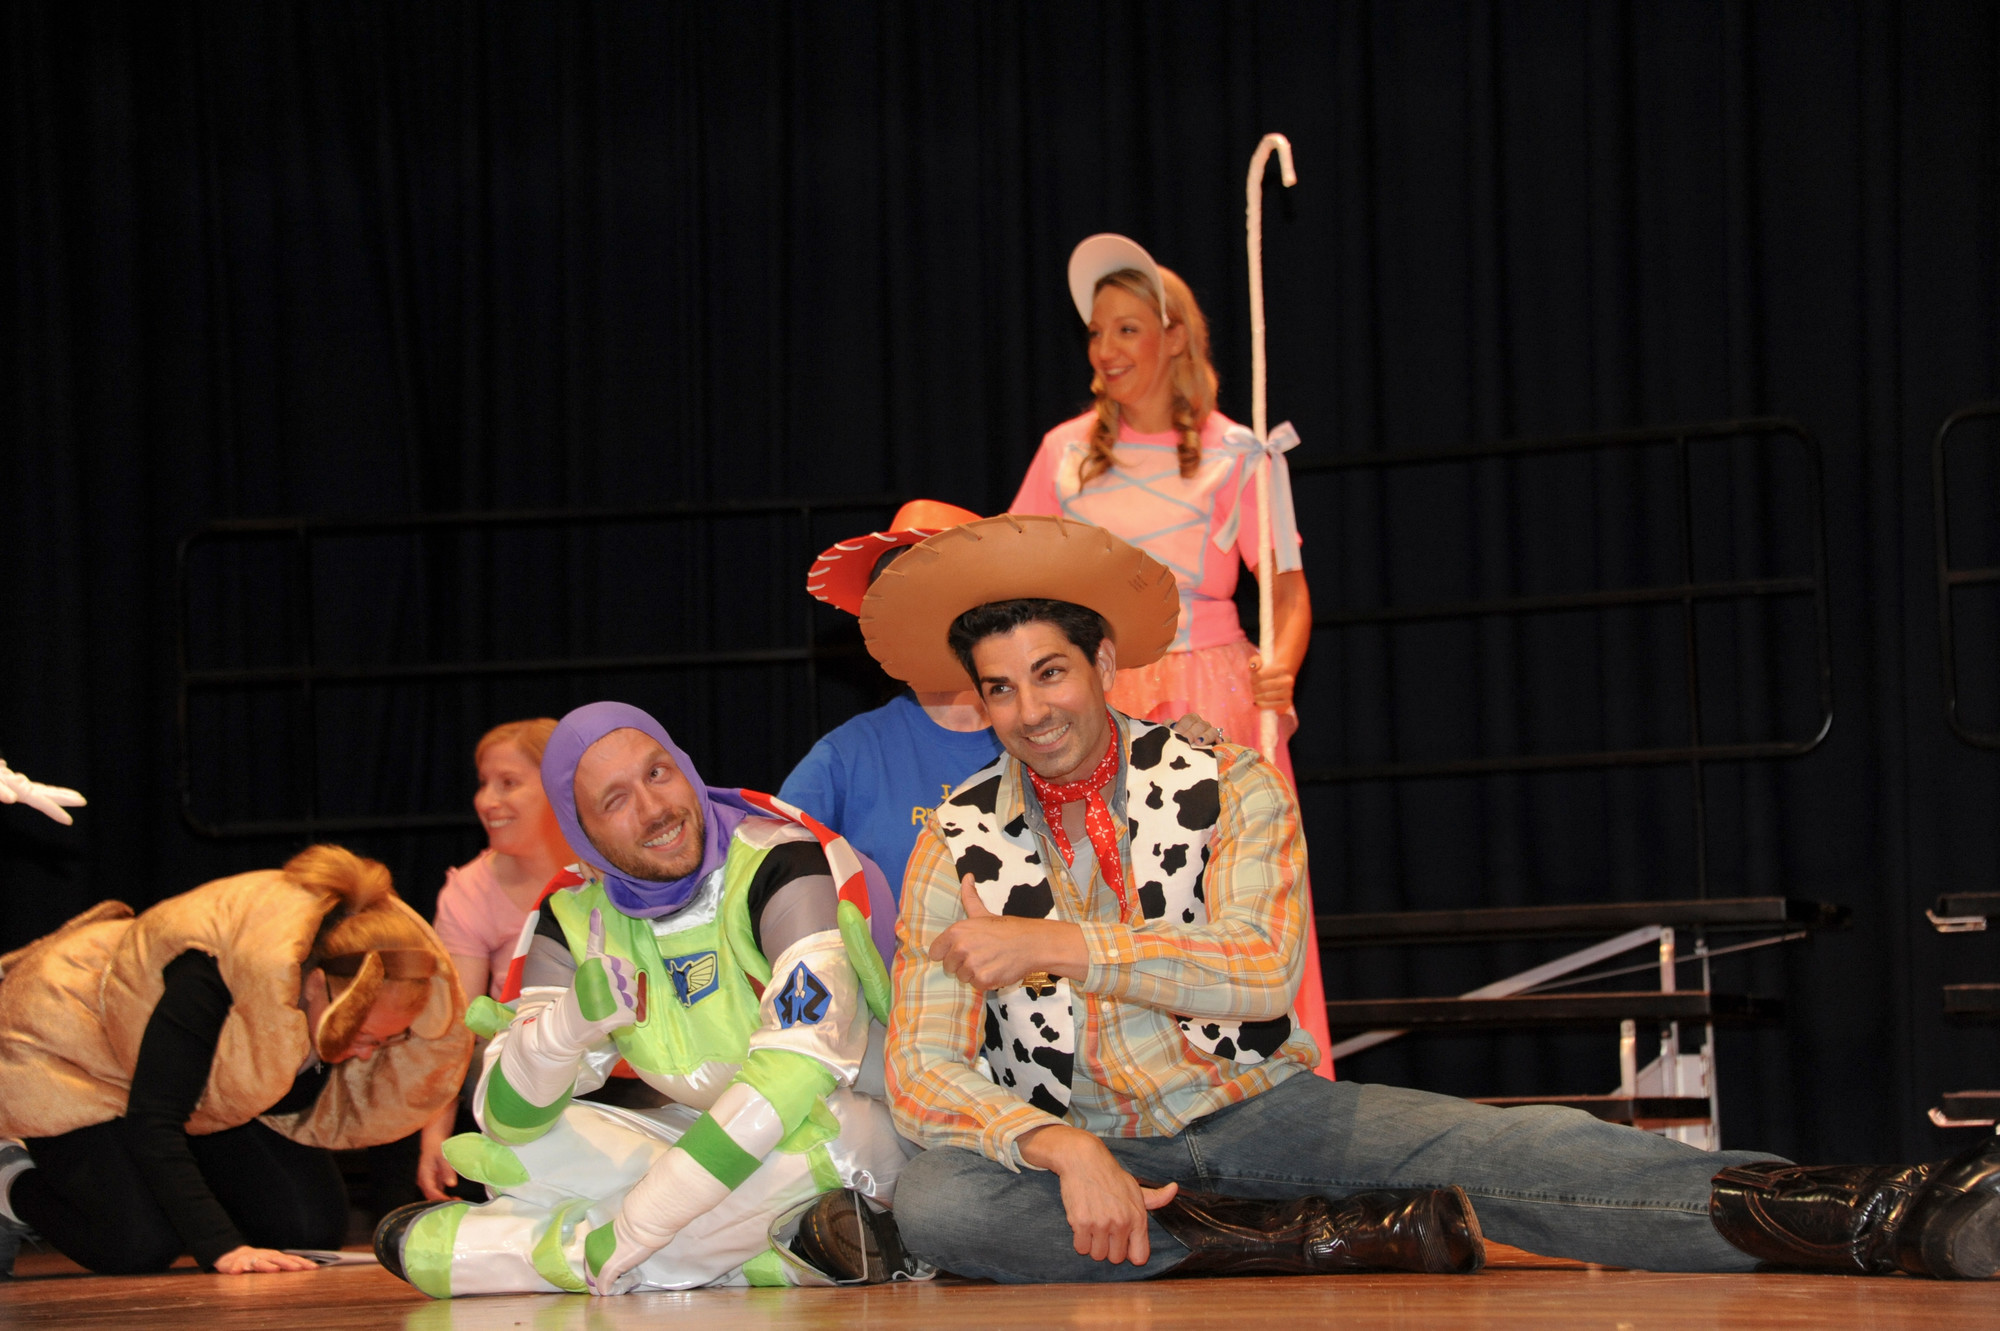 First-grade teachers Chris Merz and David Reilly played Buzz Lightyear and Woody, respectively, in the “Toy Story” sketch at the pep rally.